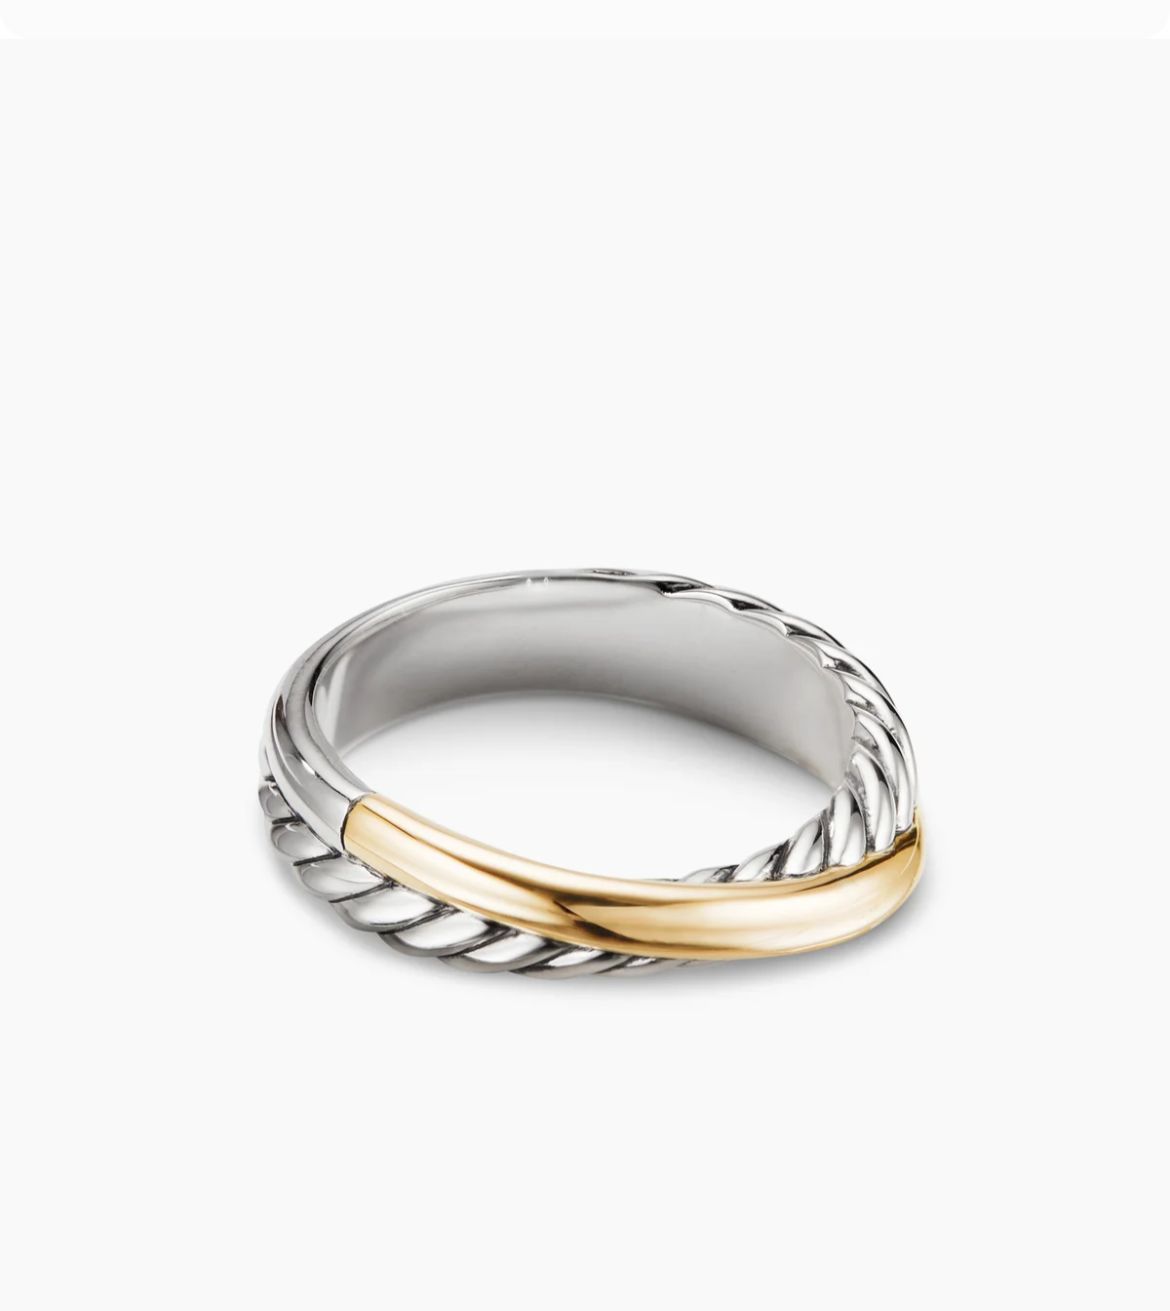 Elegant Two-Tone Twisted Cable Ring in 925 Silver and Gold Purl